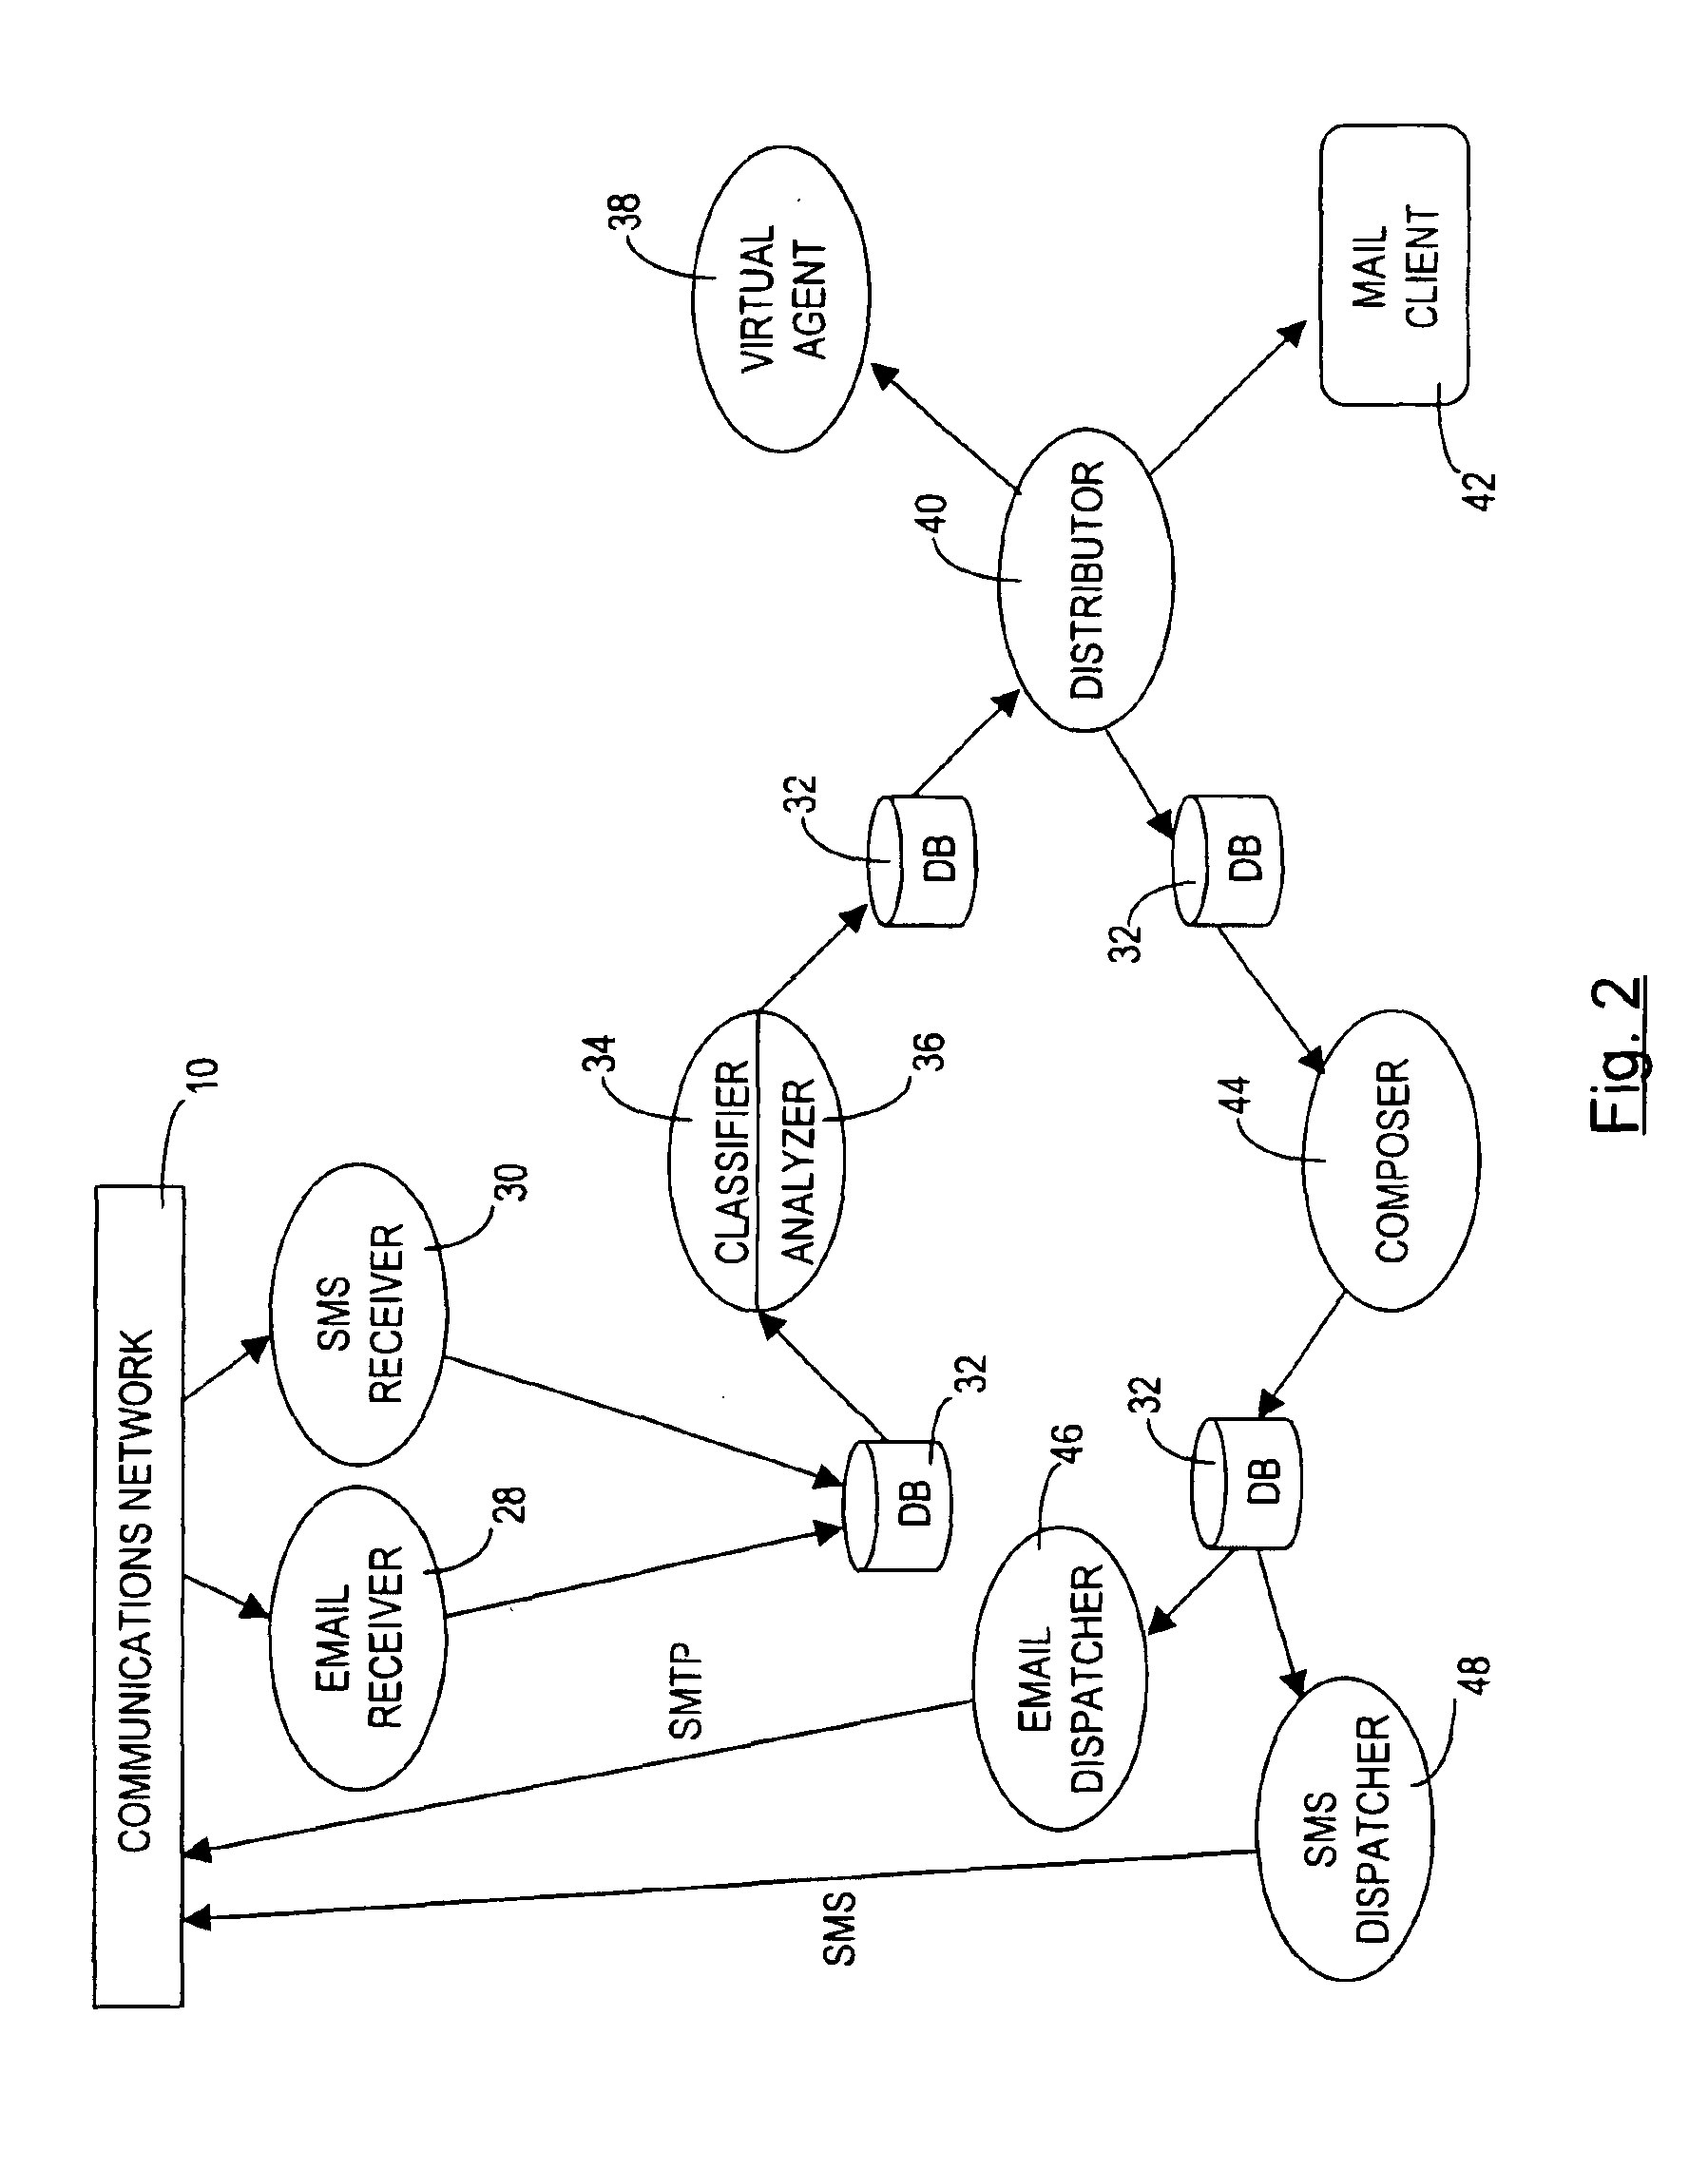 Electronic message distribution